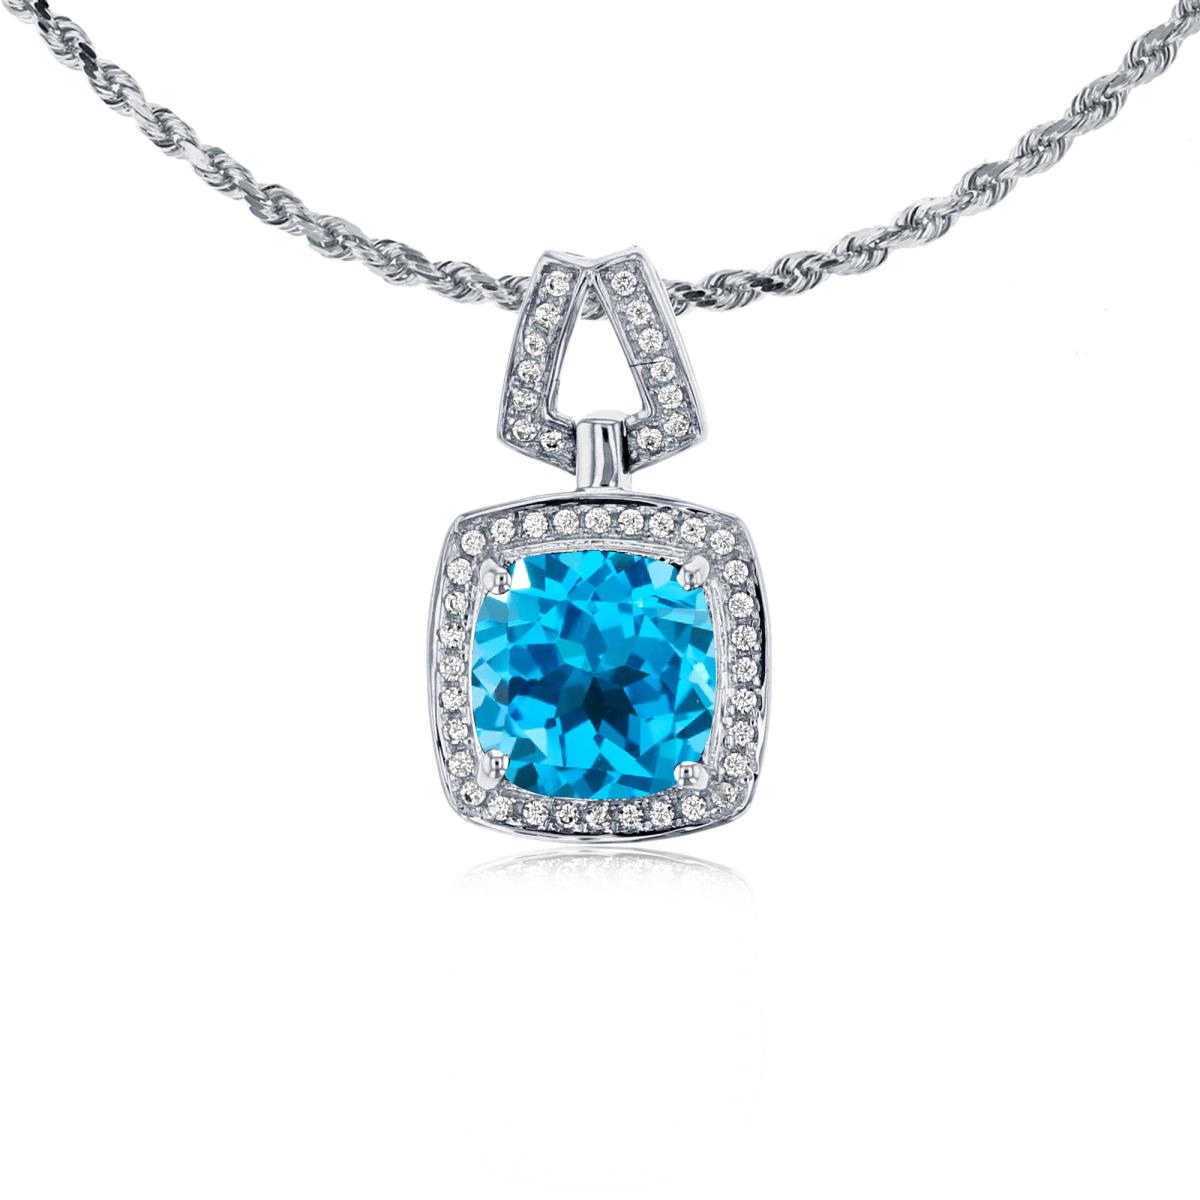 10K White Gold 7mm Cushion Swiss Blue Topaz & 0.10 CTTW Diamond Halo 18" Rope Chain Necklace